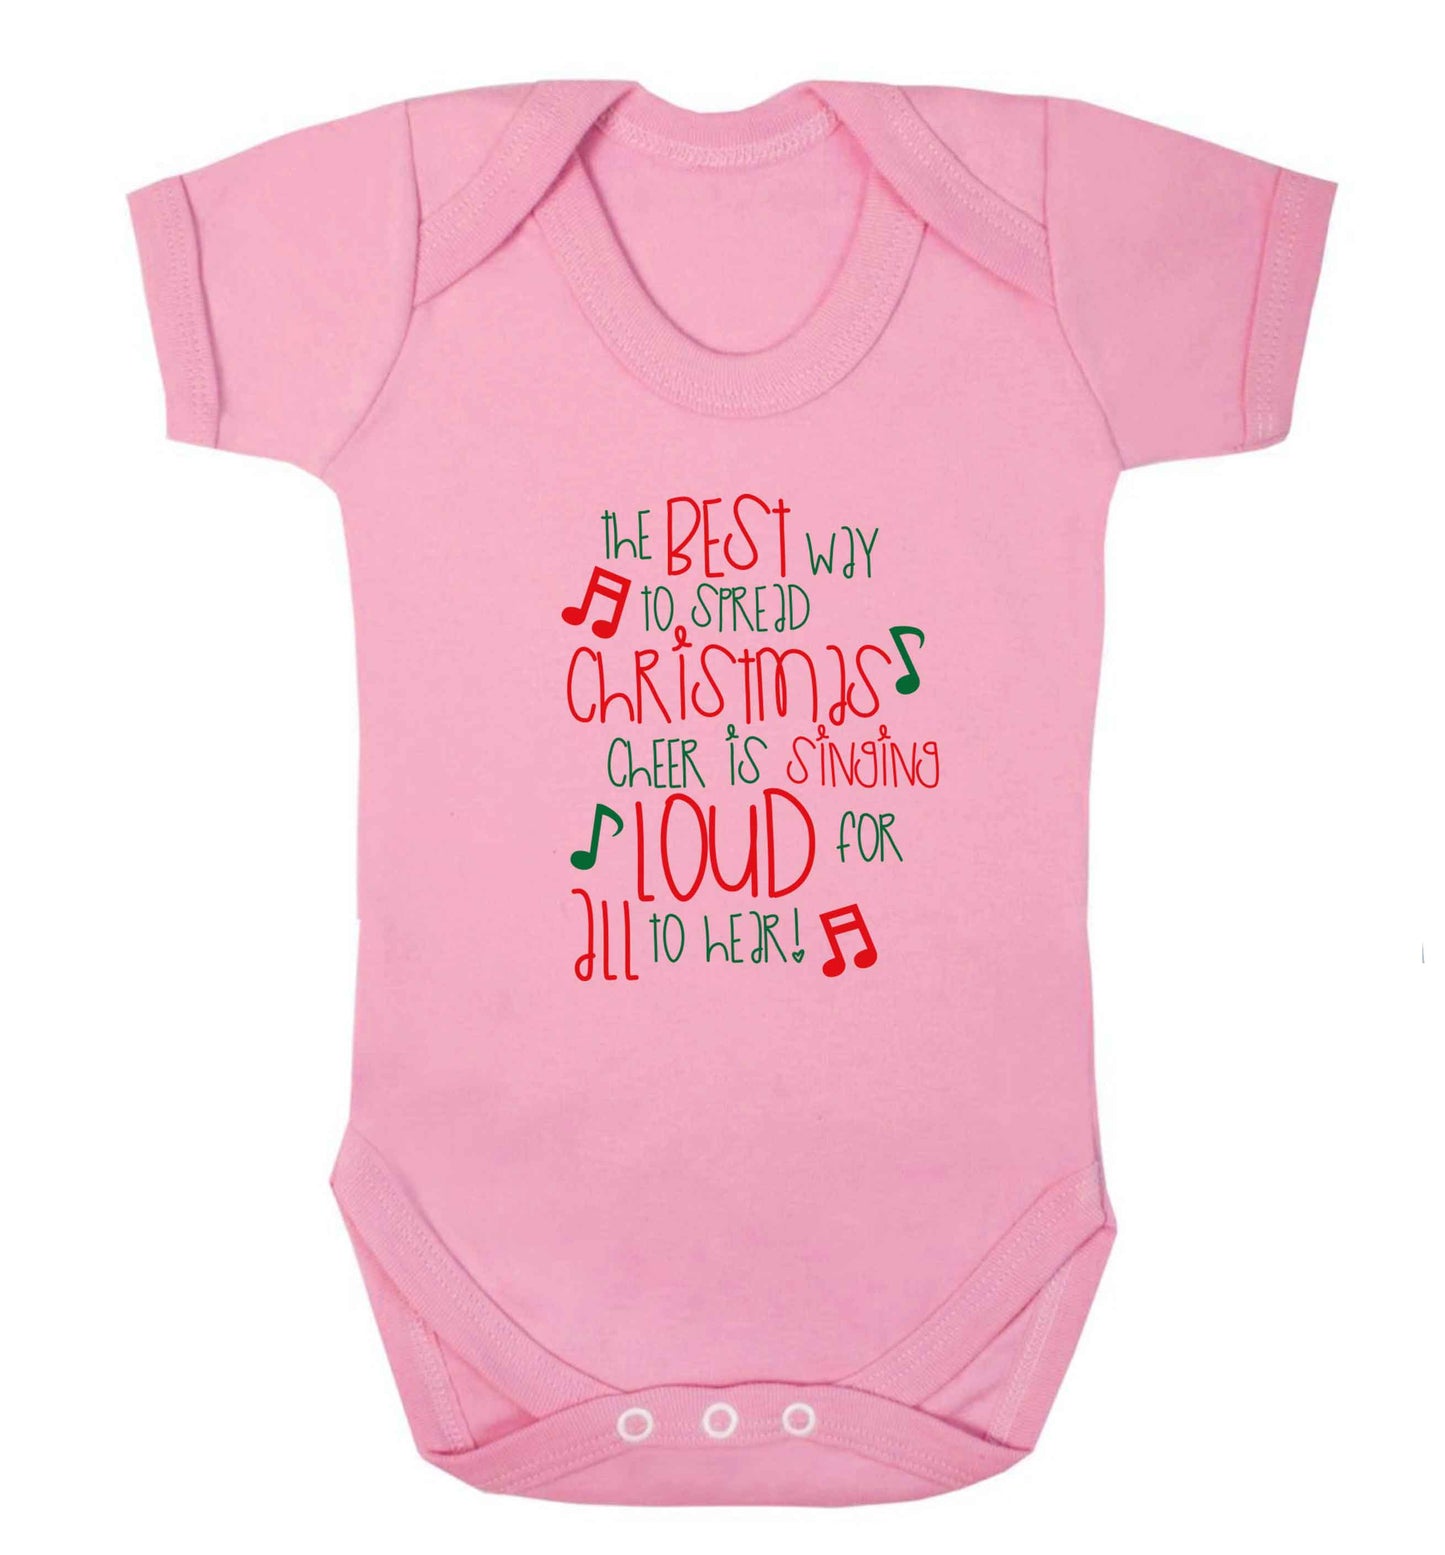 The best way to spread Christmas cheer is singing loud for all to hear baby vest pale pink 18-24 months